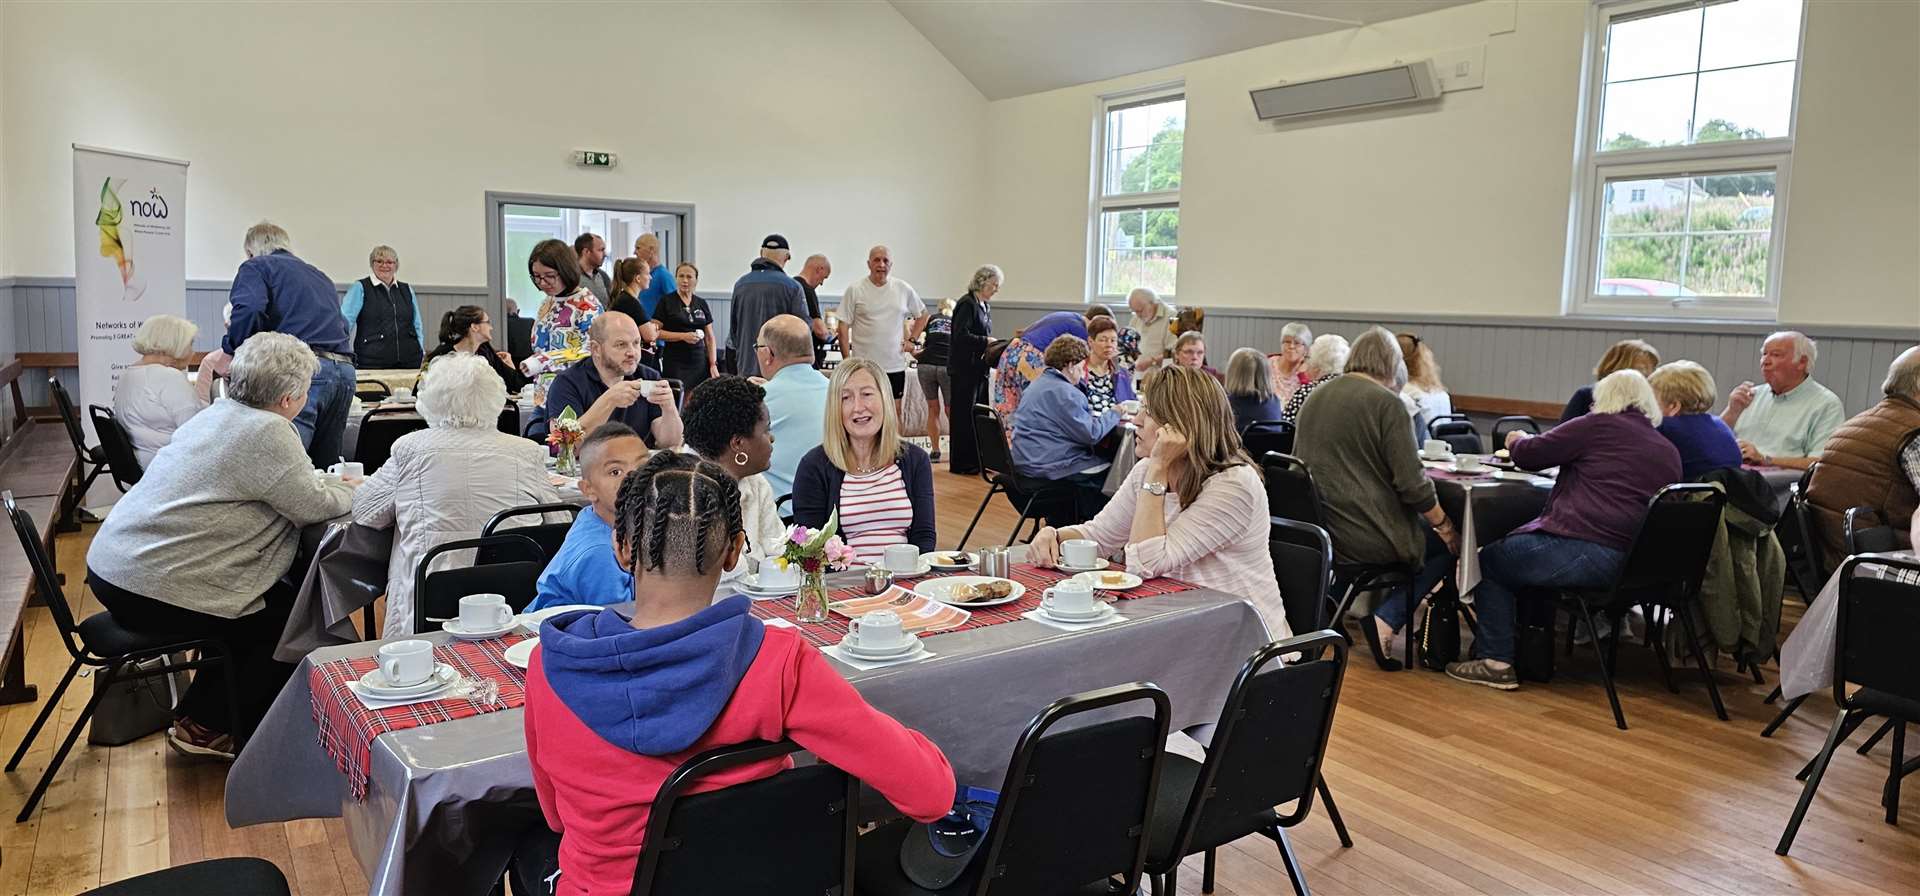 The arts-focussed event at Gartly Community Hall, pictured during a Coffee for a Cause event, is set to bring the community together again this weekend.